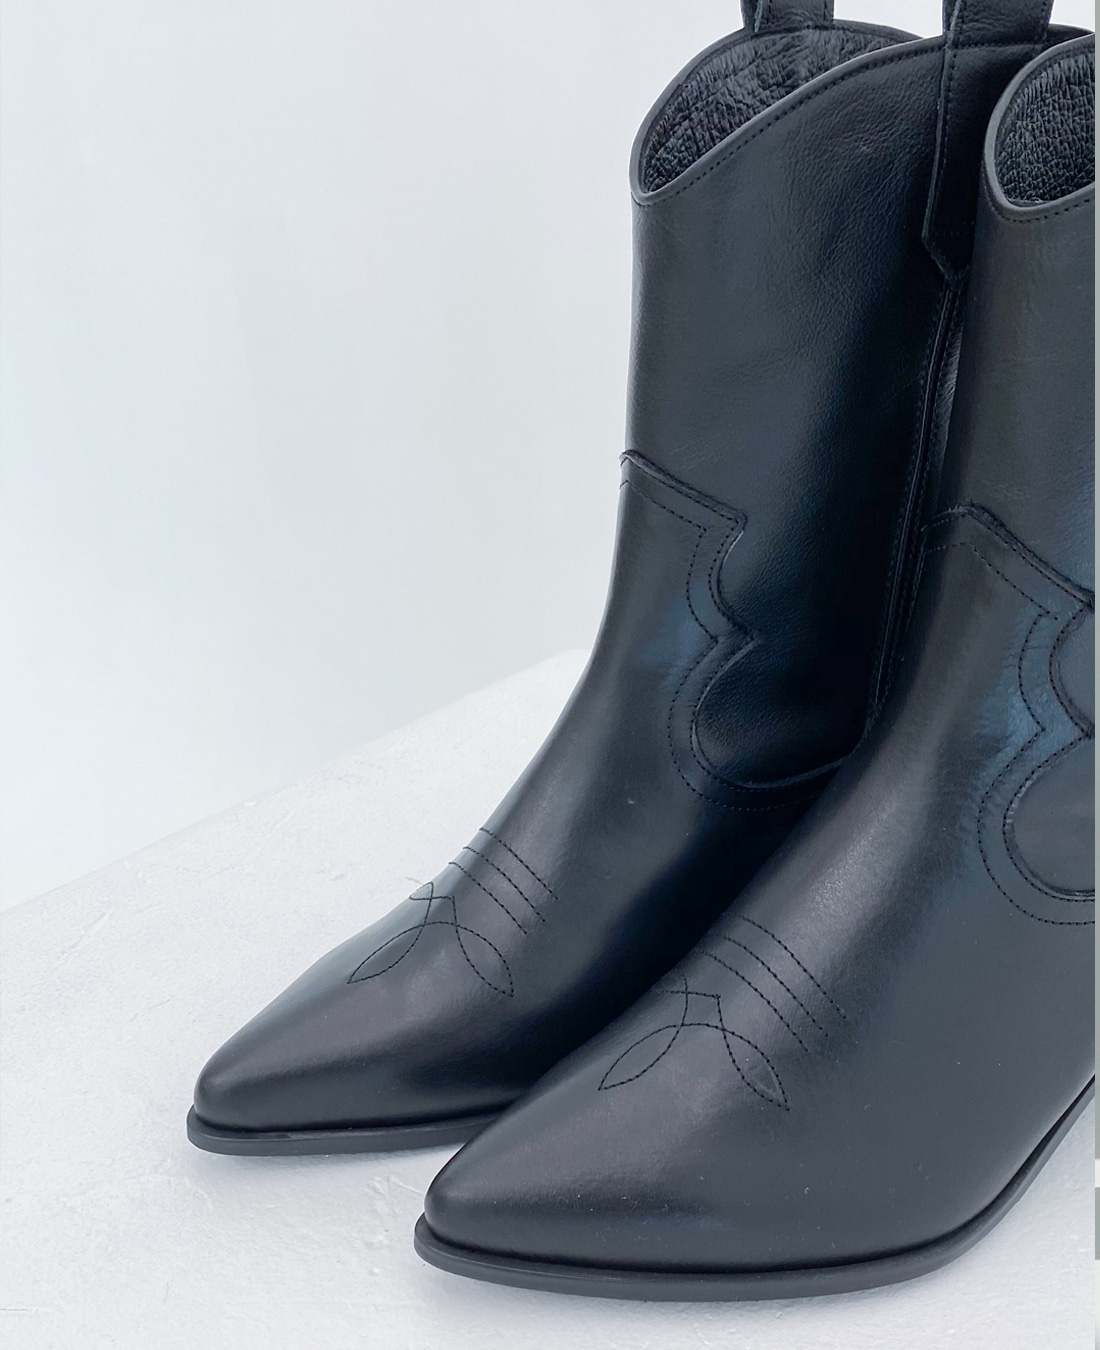 Low Western Boots (Black)